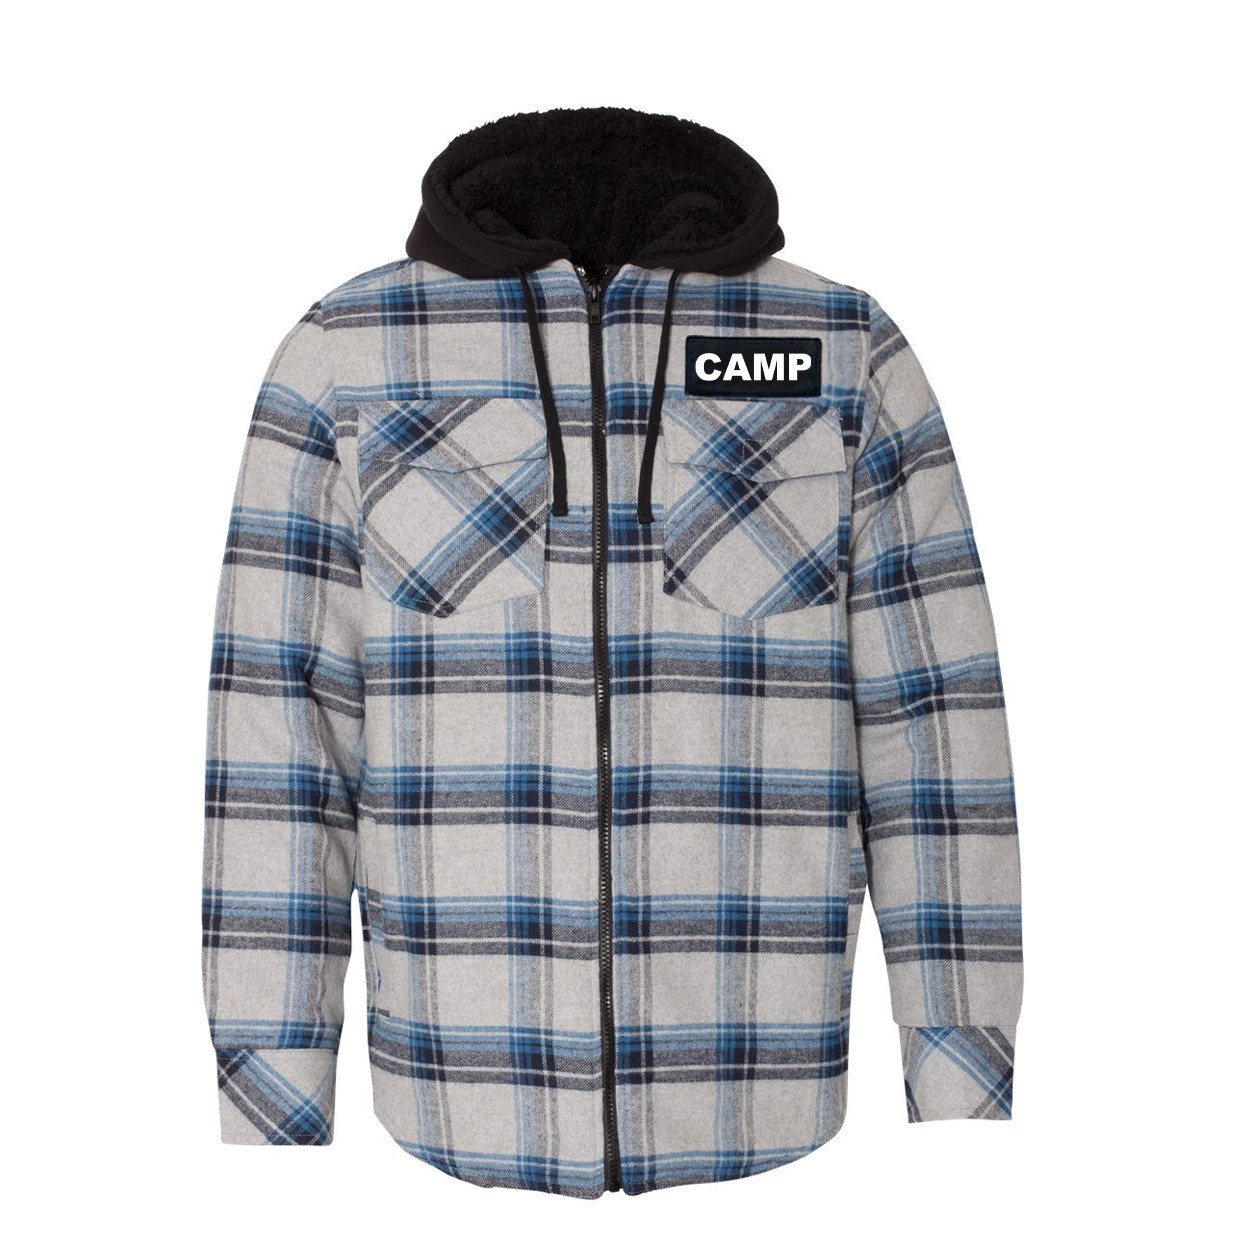 Camp Brand Logo Classic Unisex Full Zip Woven Patch Hooded Flannel Jacket Gray/ Blue